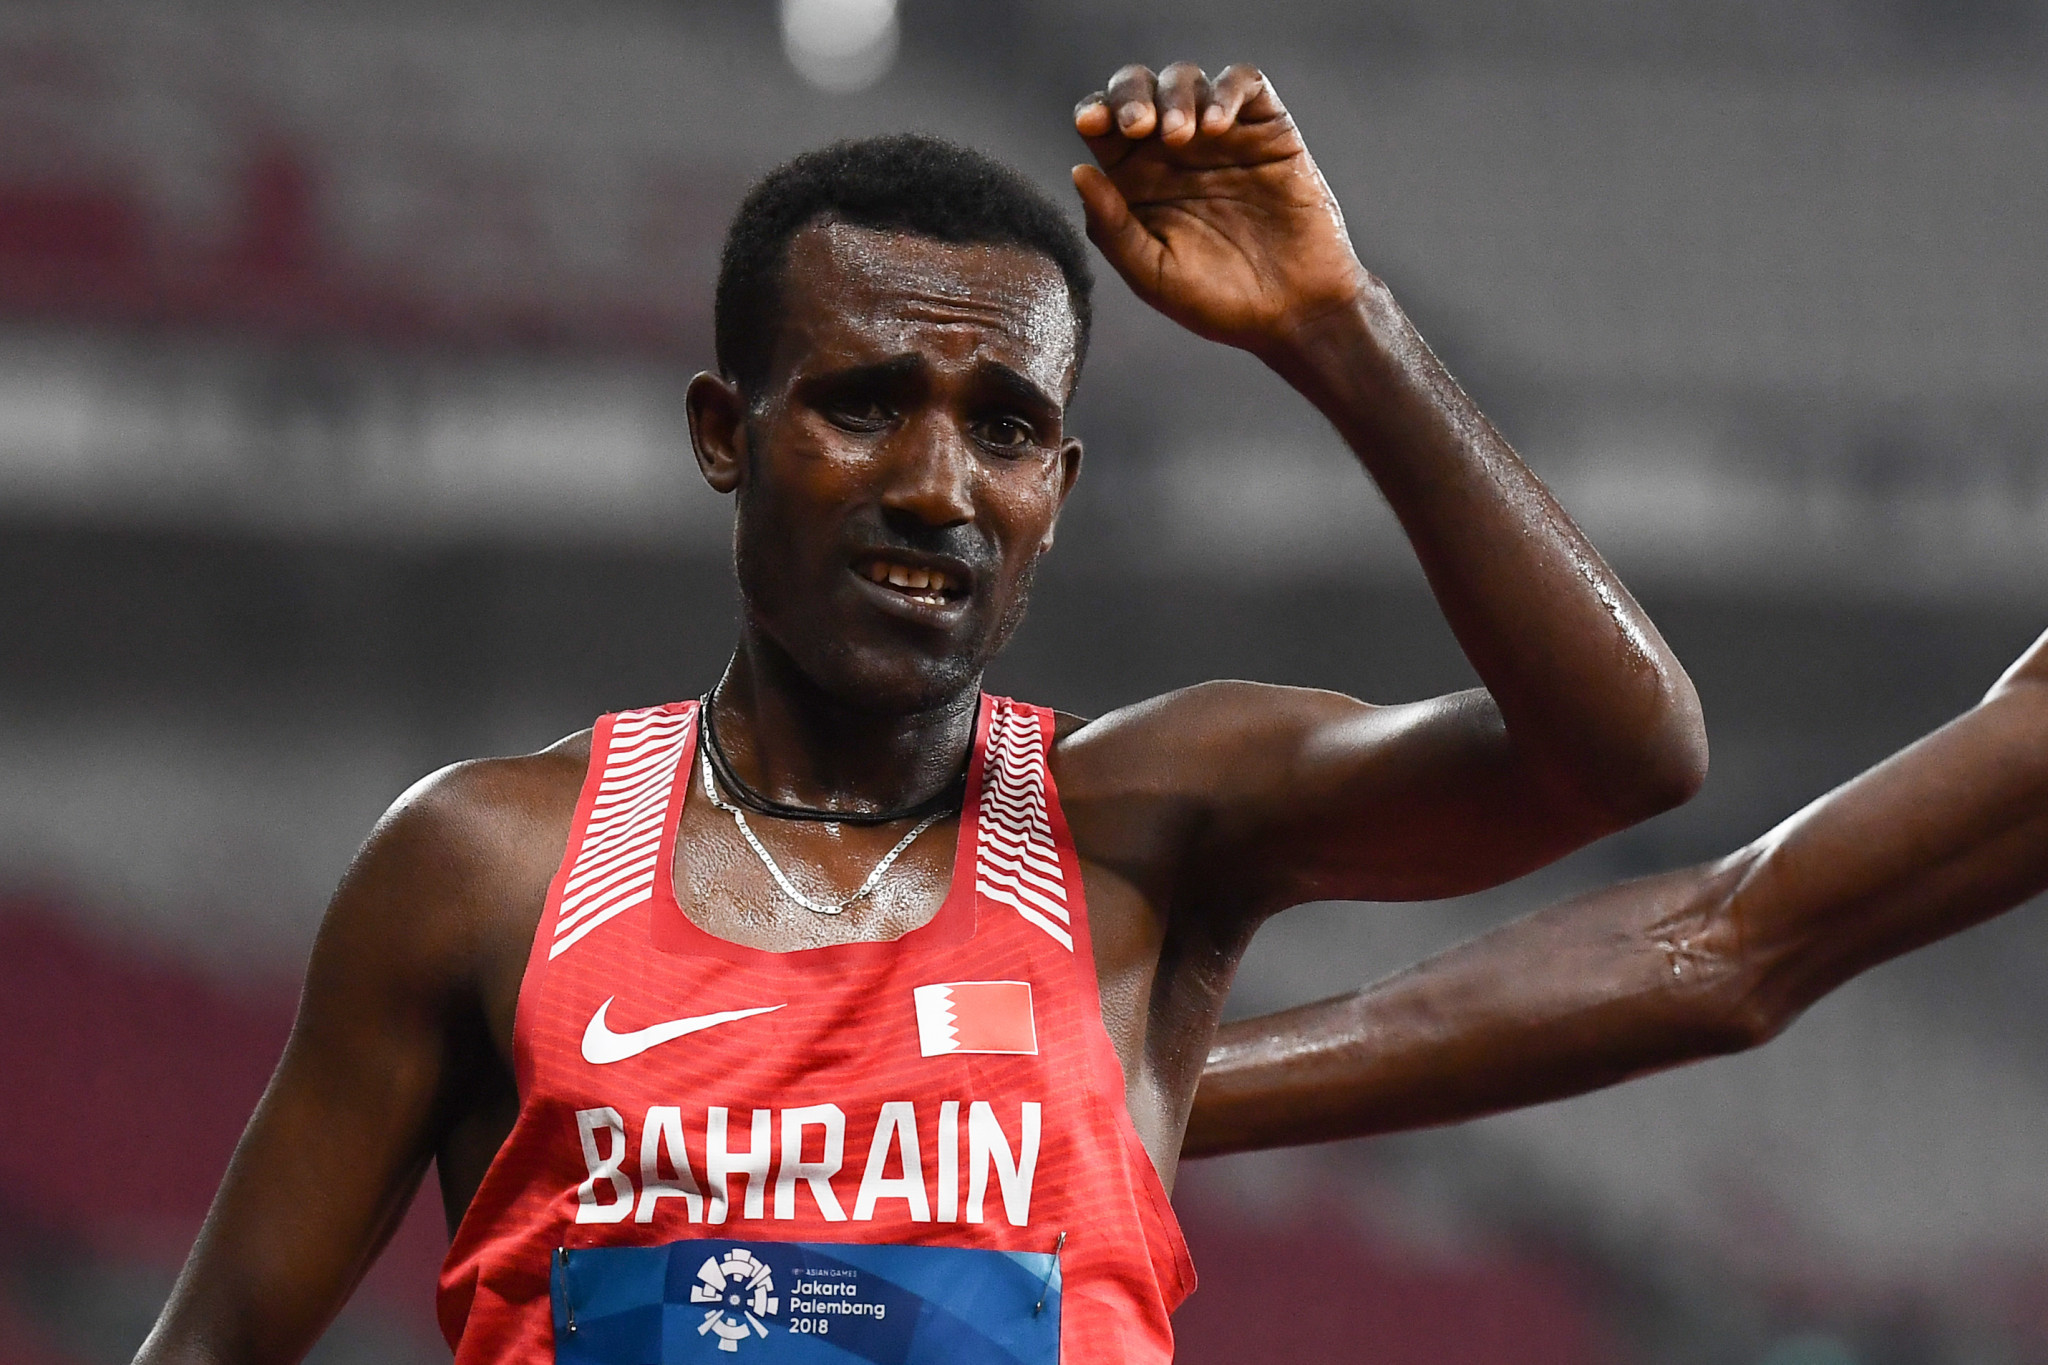 Ethiopian born Birhanu Balew won the men's race today at the IAAF Cross Country Permit meet in Antrim ©Getty Images